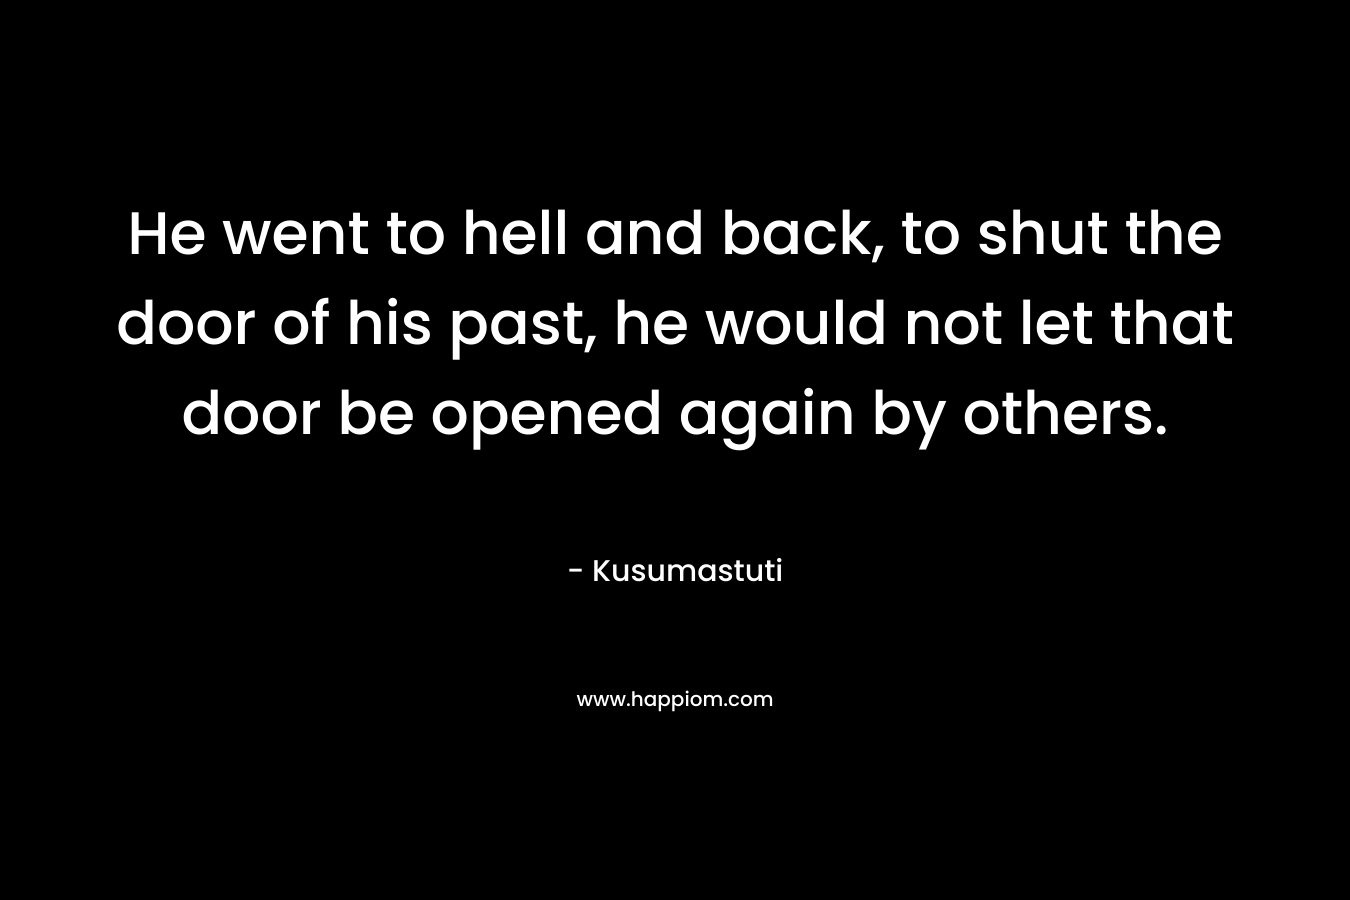 He went to hell and back, to shut the door of his past, he would not let that door be opened again by others.